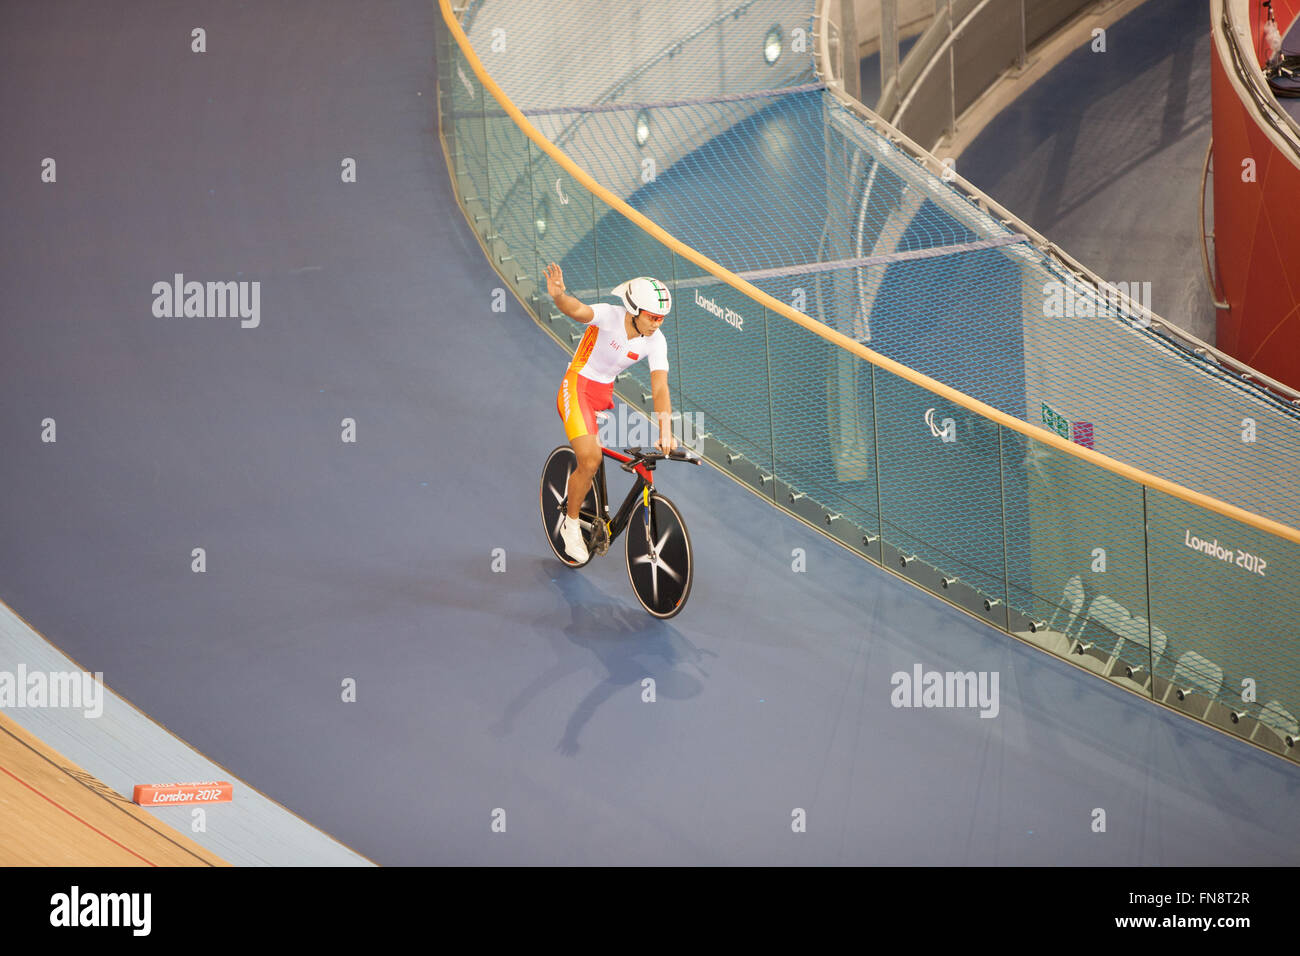 Chinese athlete,Guihua Liang wins gold medal in C2 individual pursuit in velodrome during Paralympics,London,2012,England,UK. Stock Photo